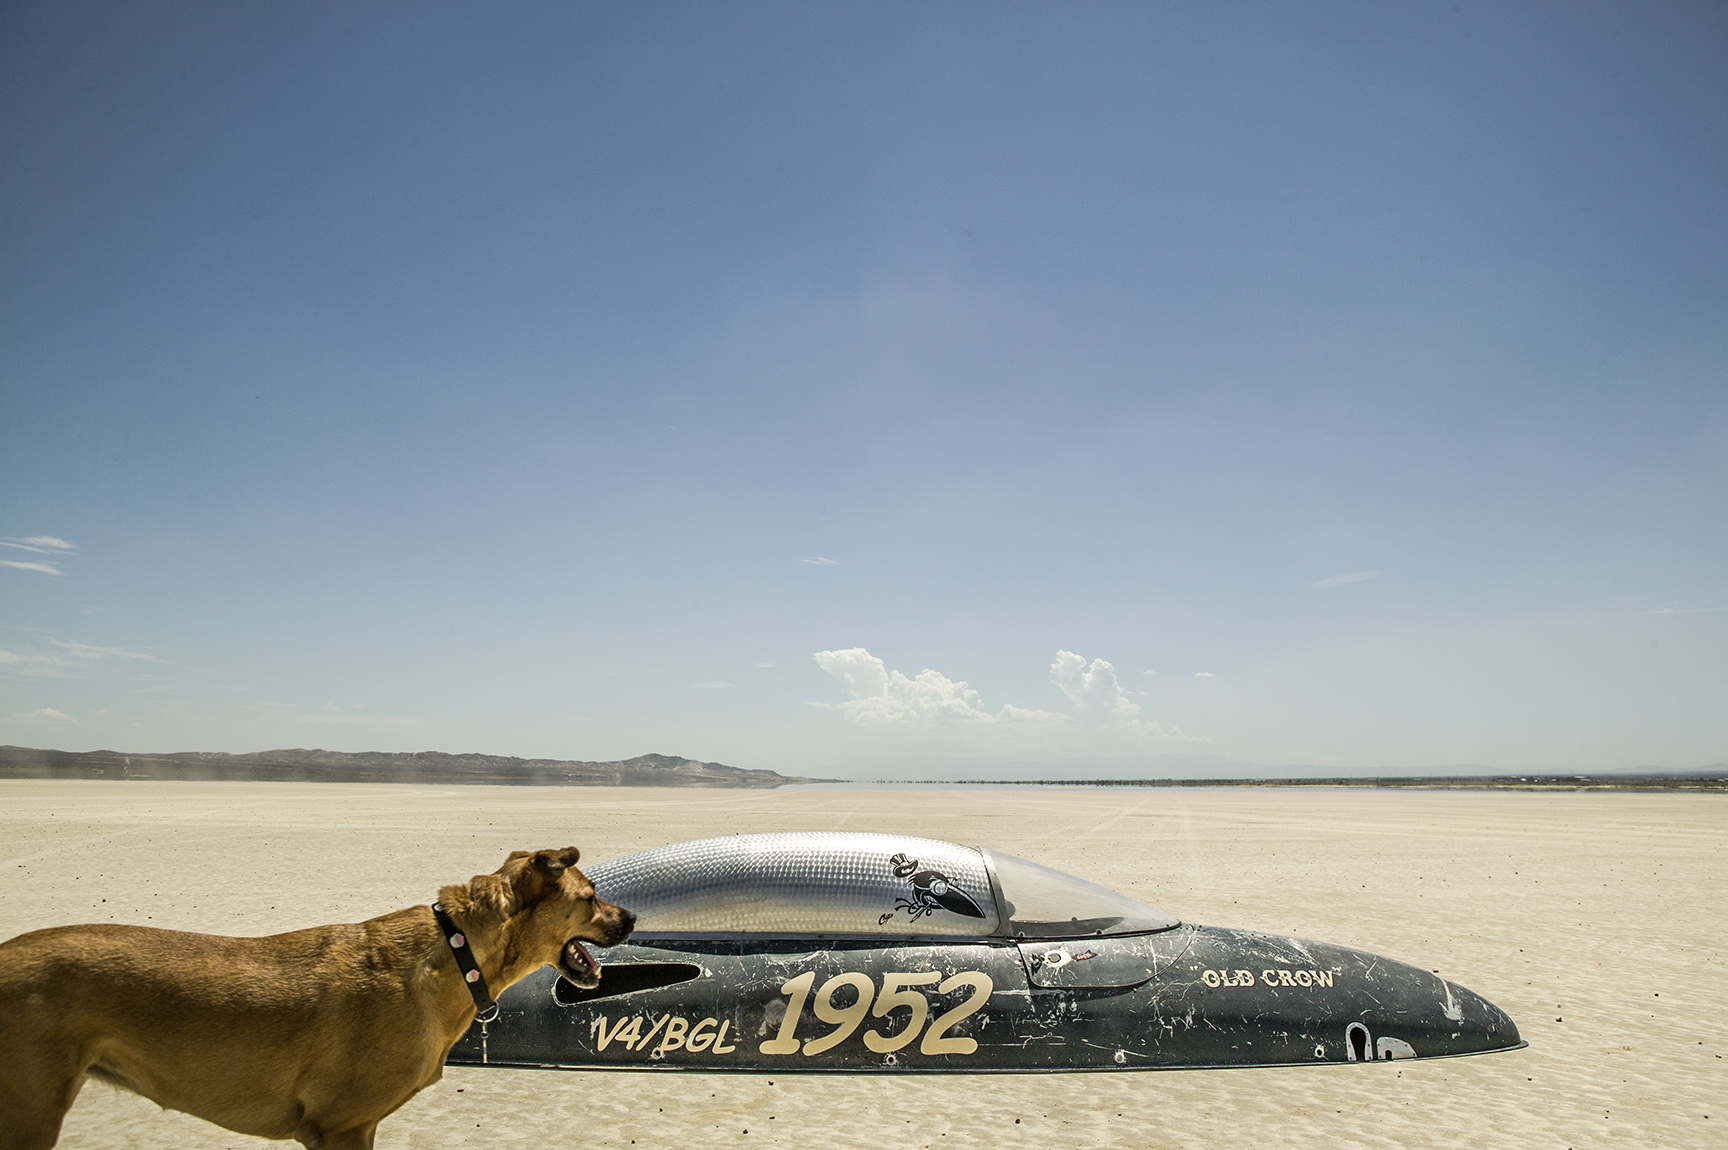  The canopy of a belly tank race car&nbsp;out in the Mojave desert.&nbsp; 